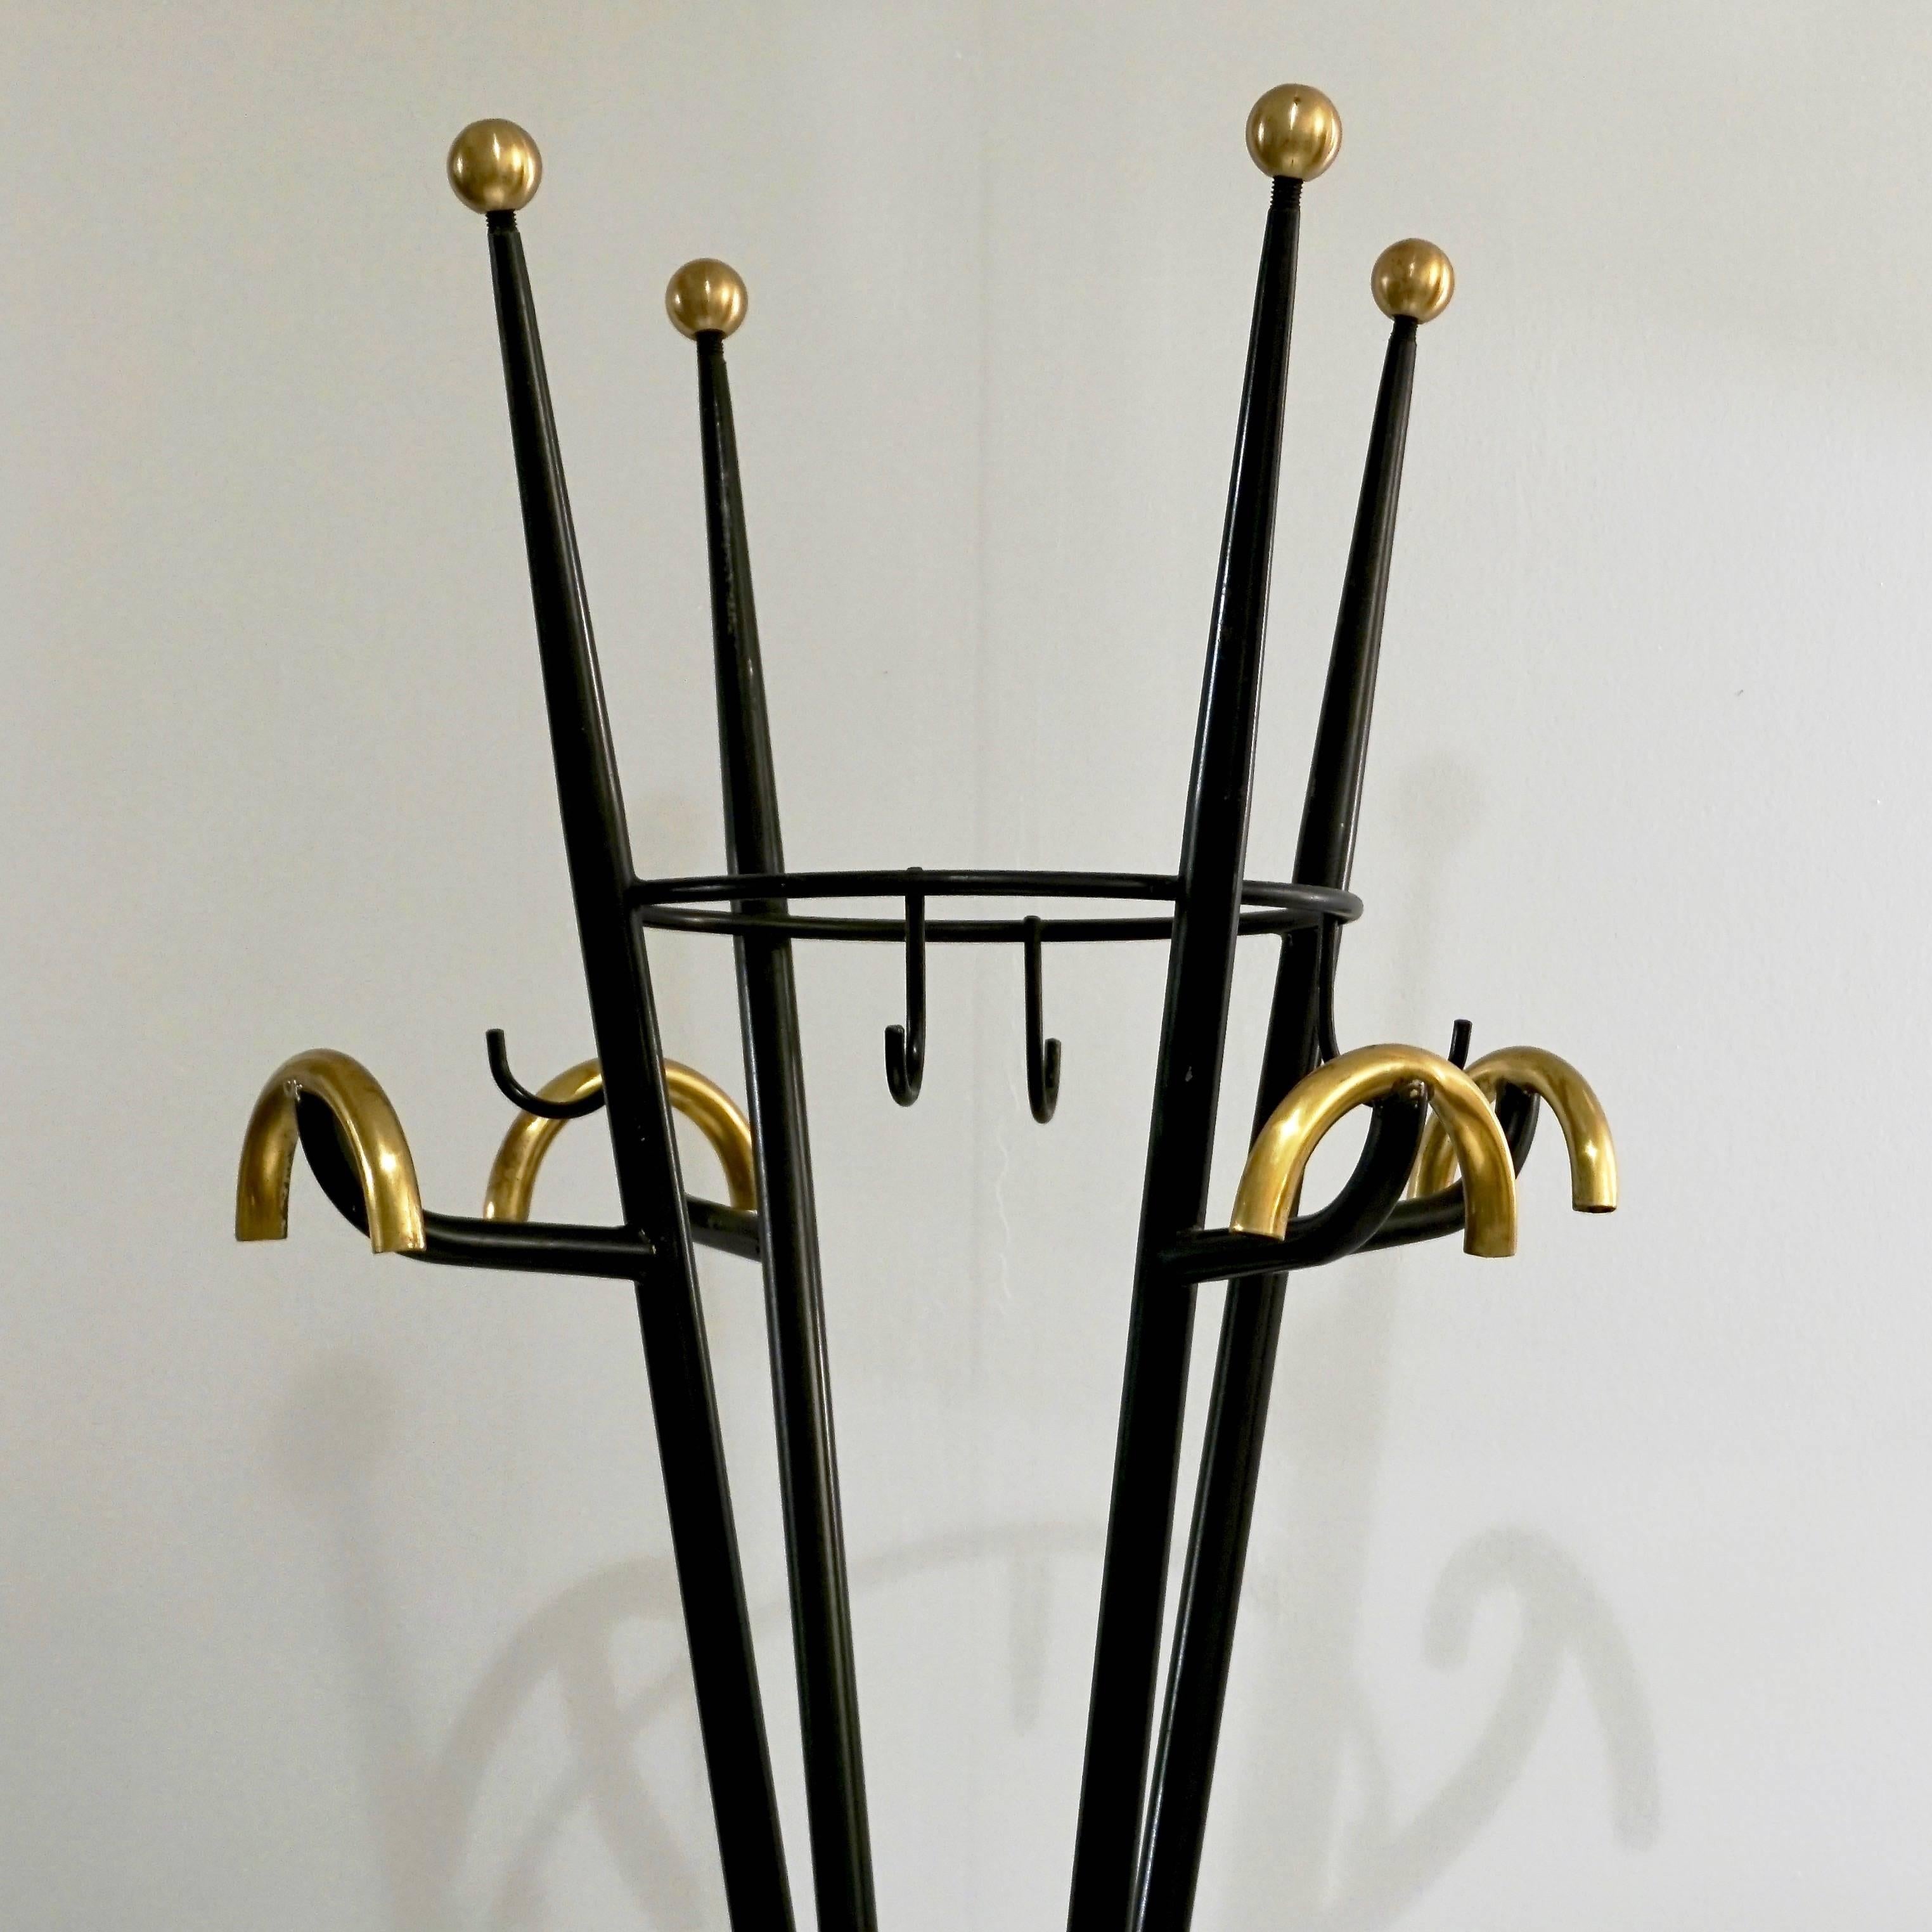 1980s Italian Modern Black Lacquered and Gold Brass Coat Rack or Umbrella Stand 2